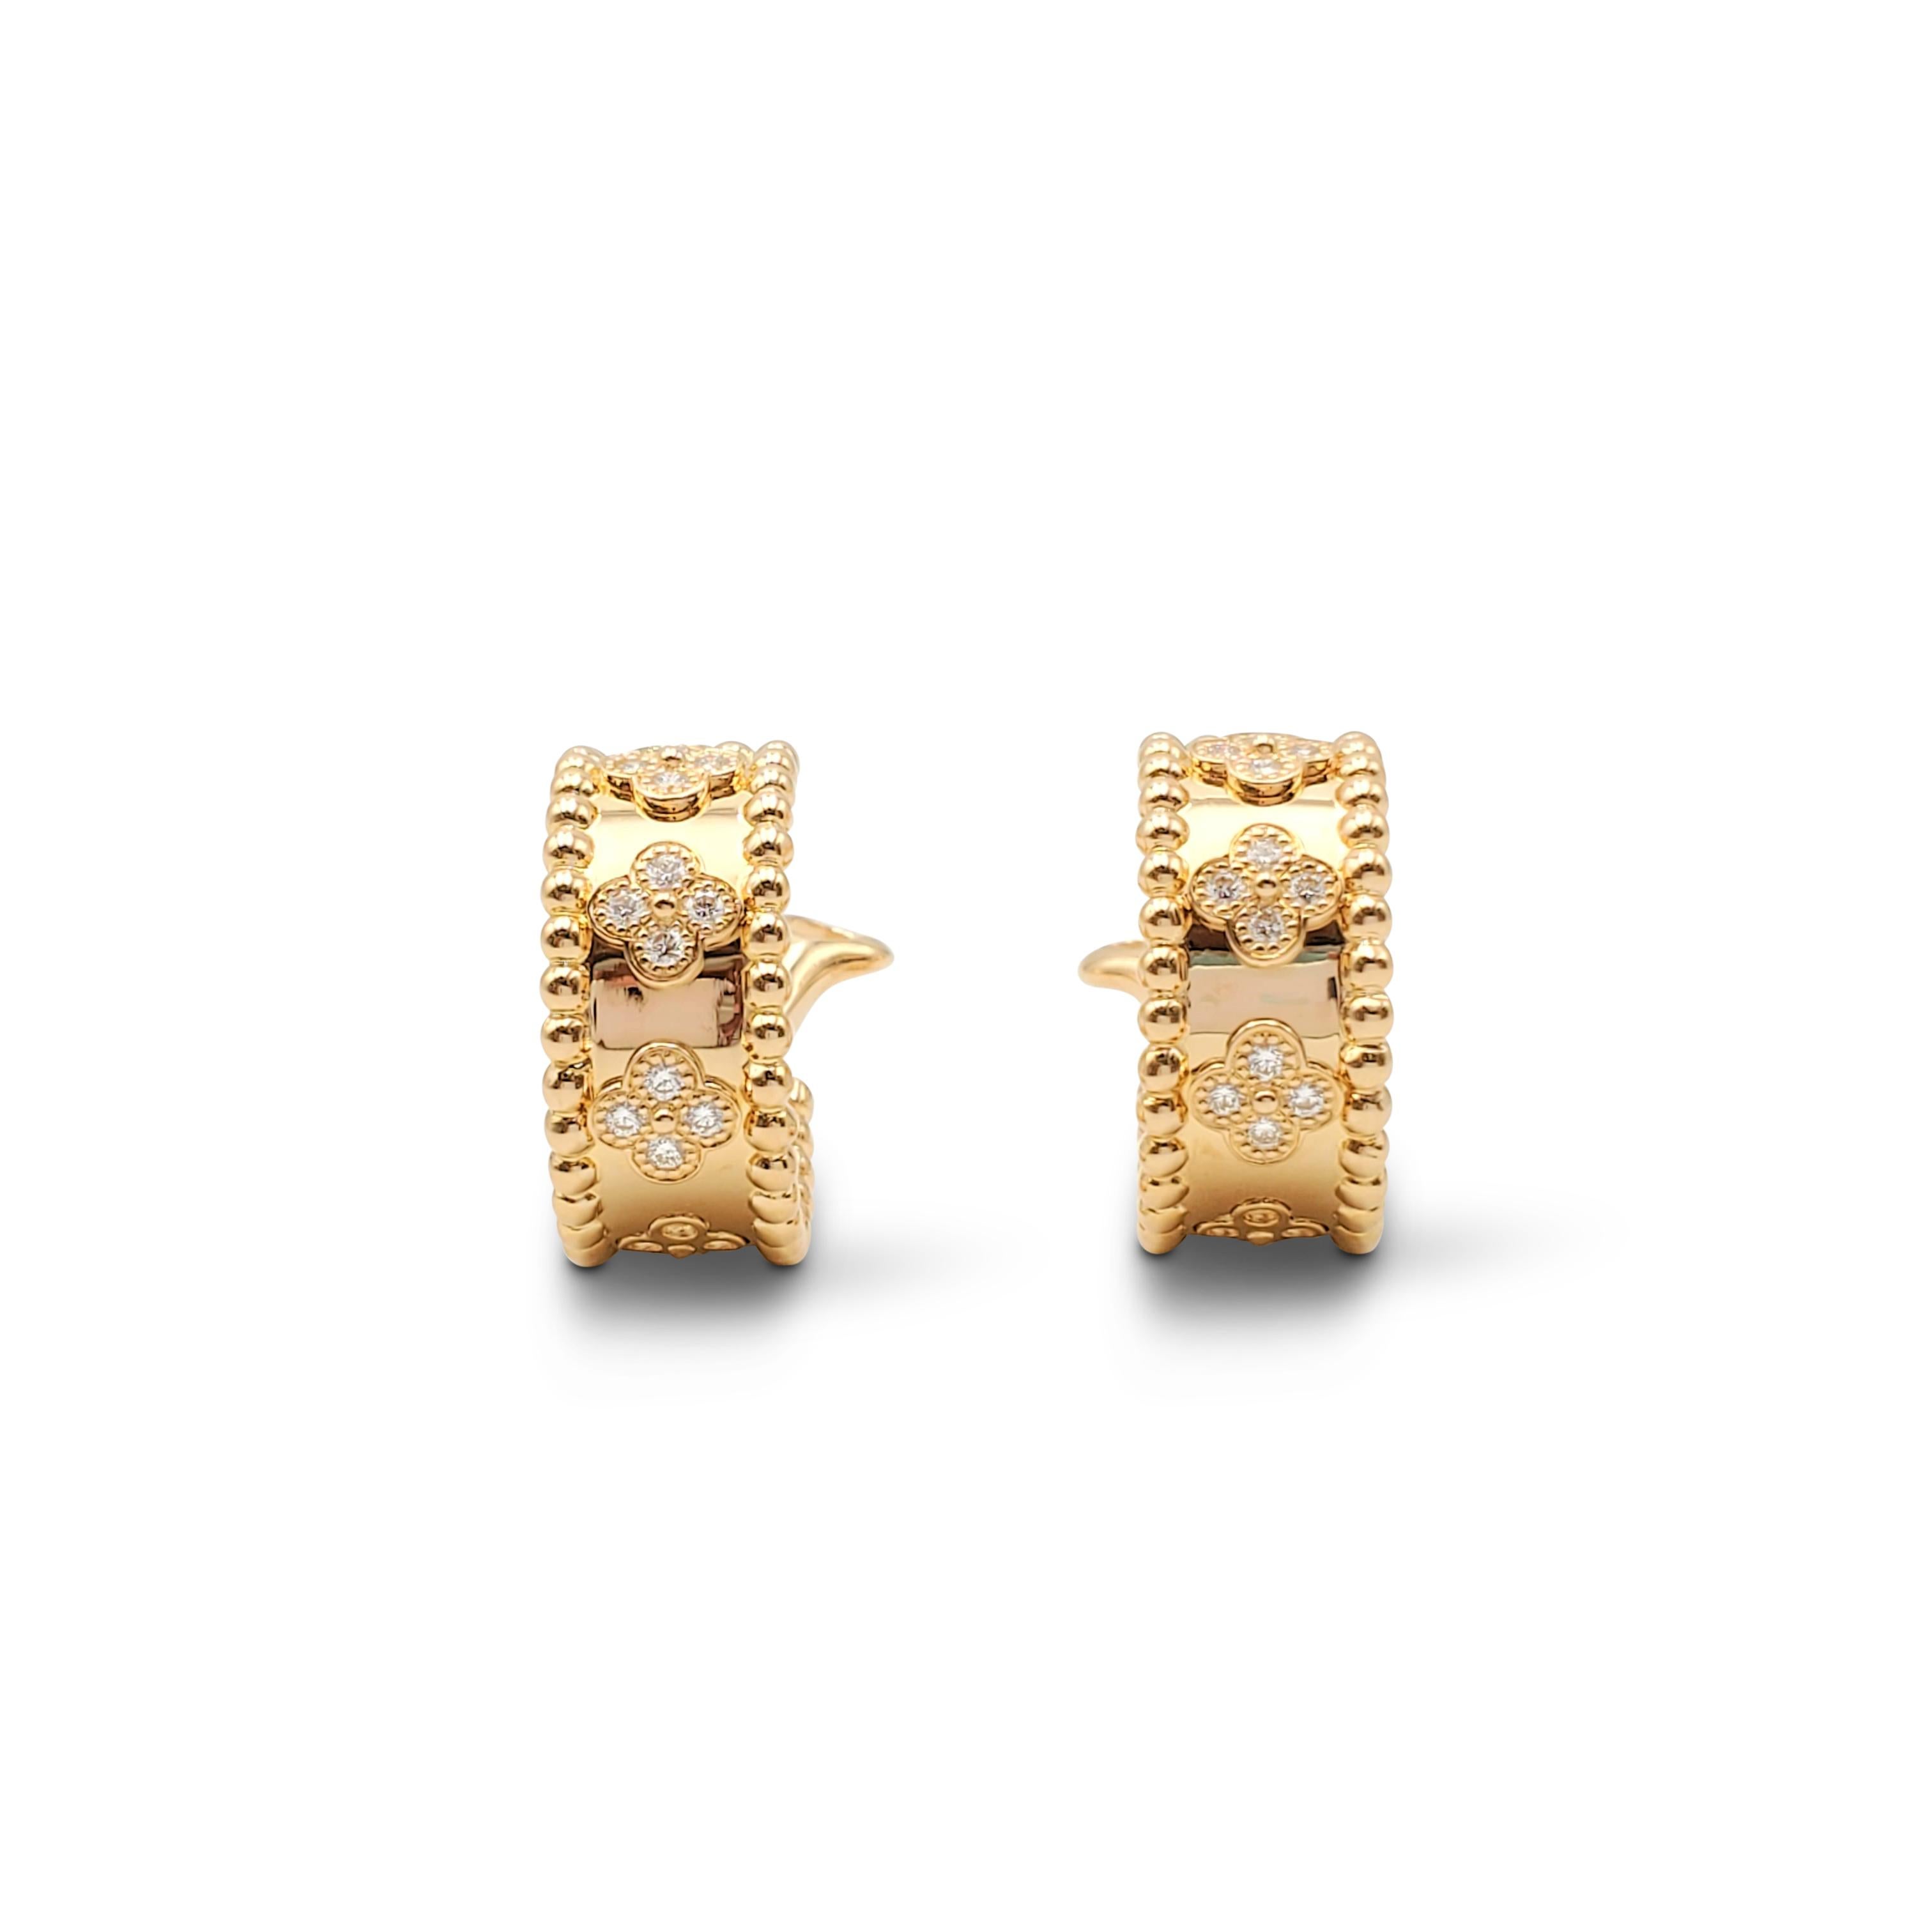 Authentic pair of Van Cleef & Arpels Perlée earrings crafted in 18 karat yellow gold featuring five sections of clovers set with round brilliant cut diamonds (E-F color, VS clarity) weighing an estimated 0.80 carats total. Signed VCA, Au750, with